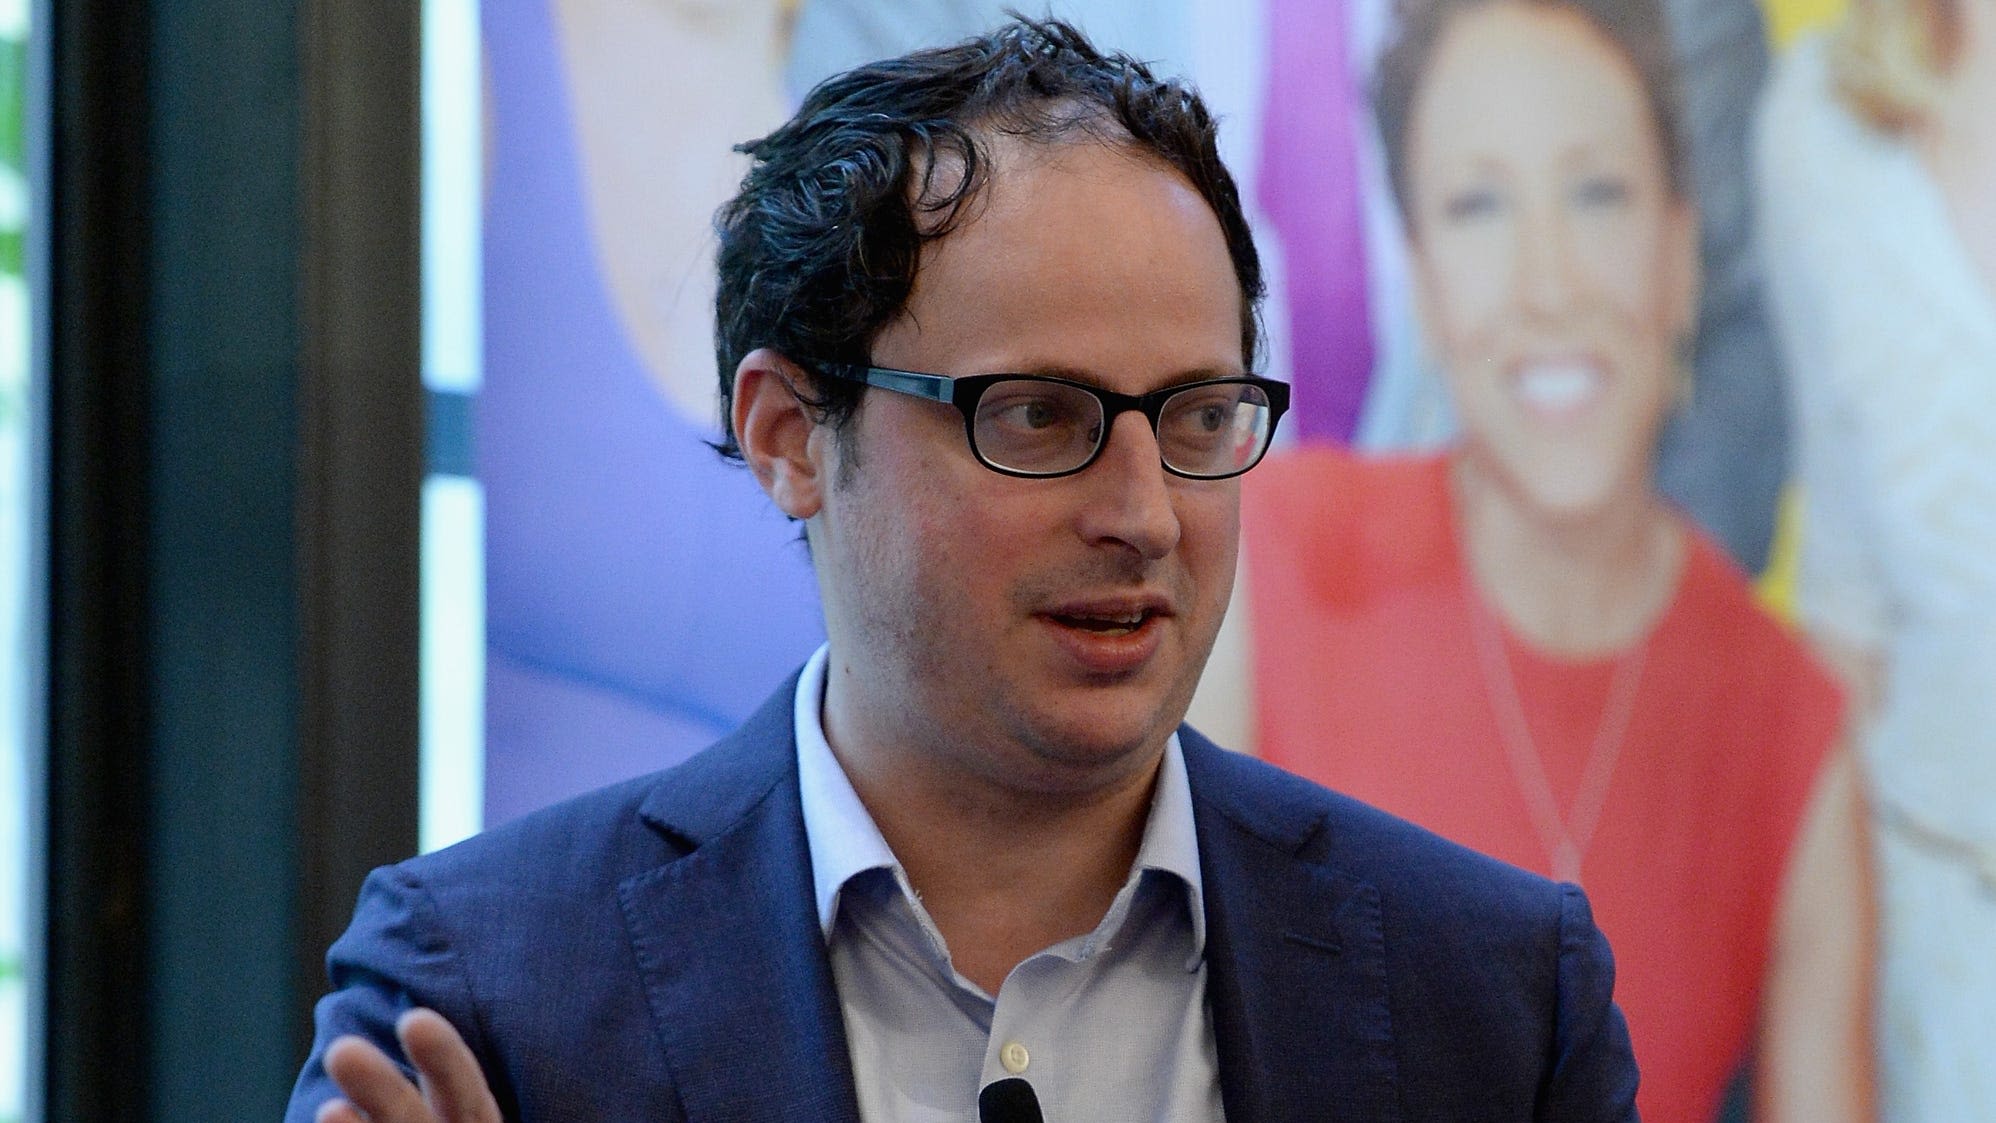 Nate Silver says Biden should step down and let Harris become president before November